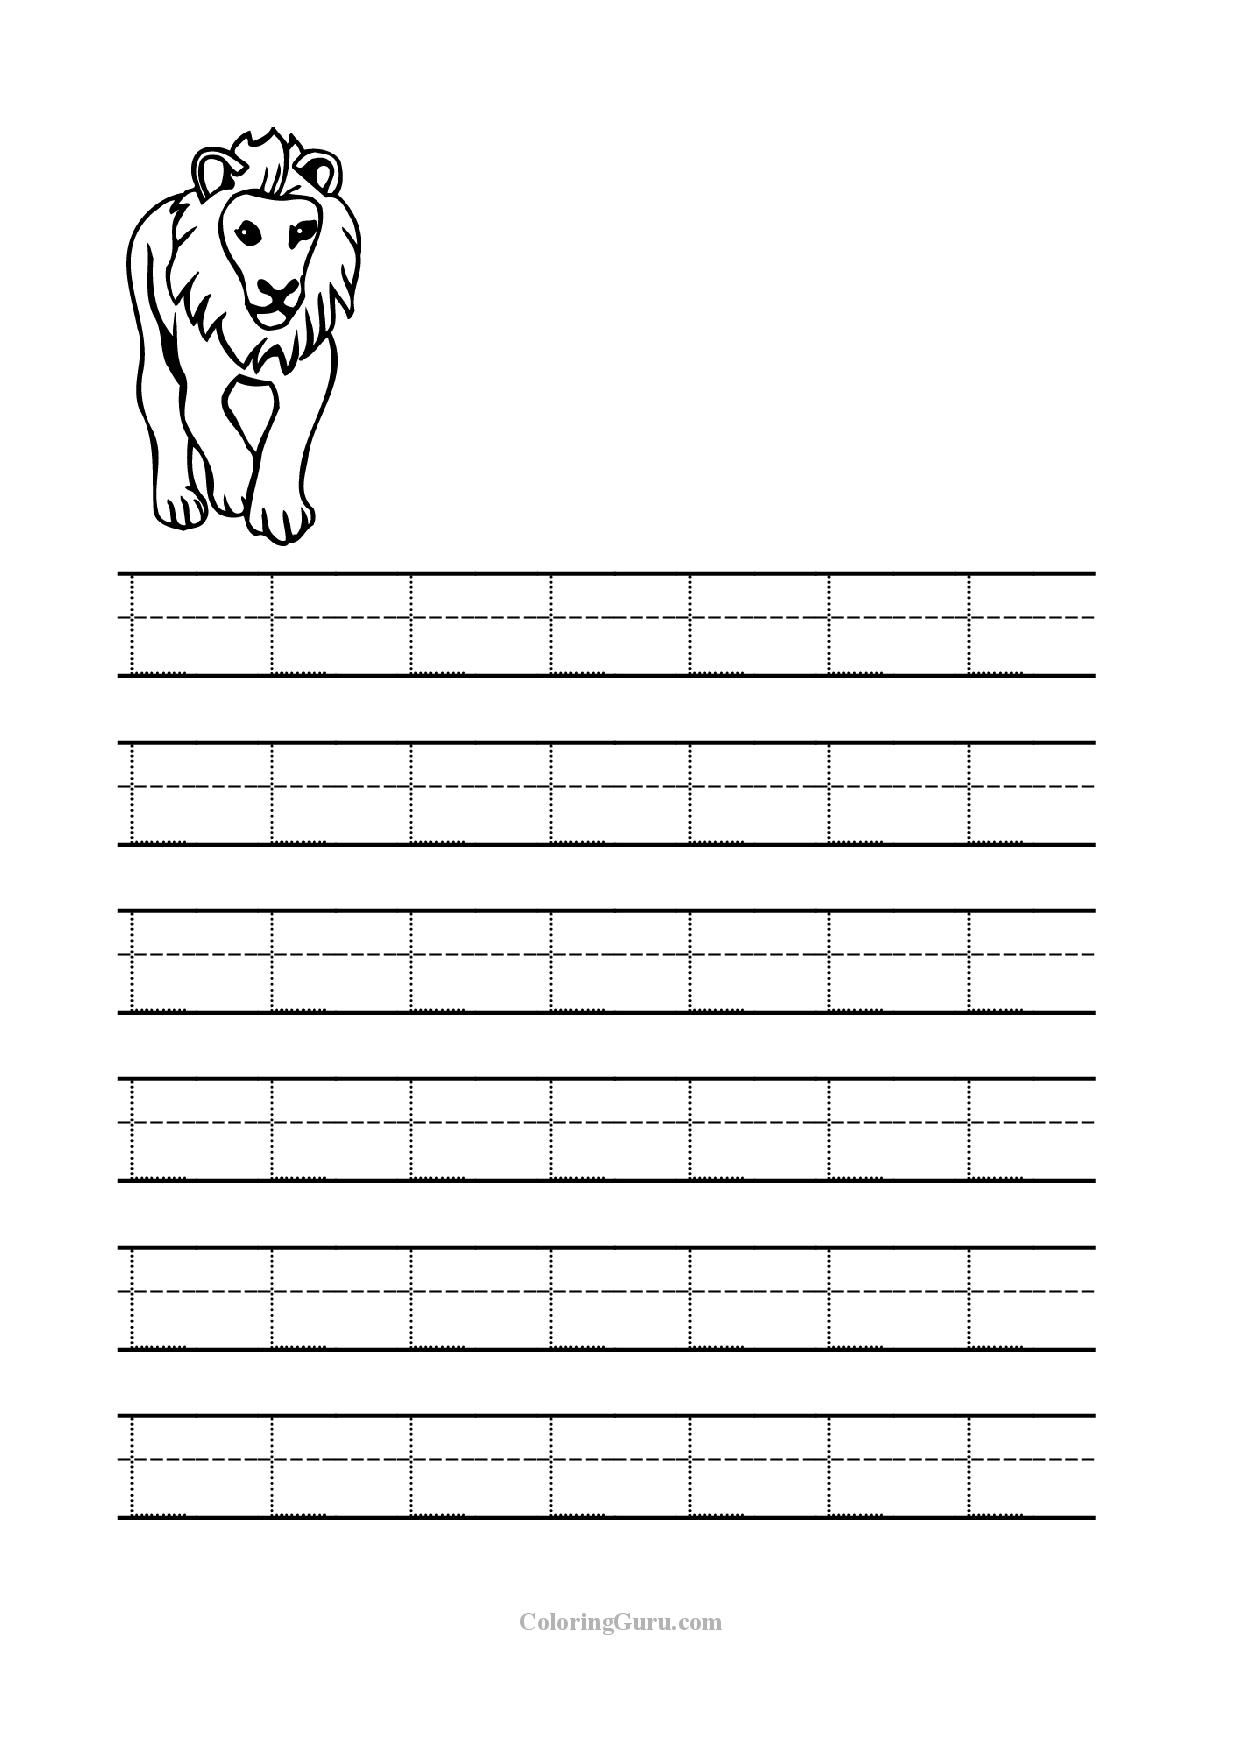 Free Printable Tracing Letter L Worksheets For Preschool inside Letter L Worksheets Free